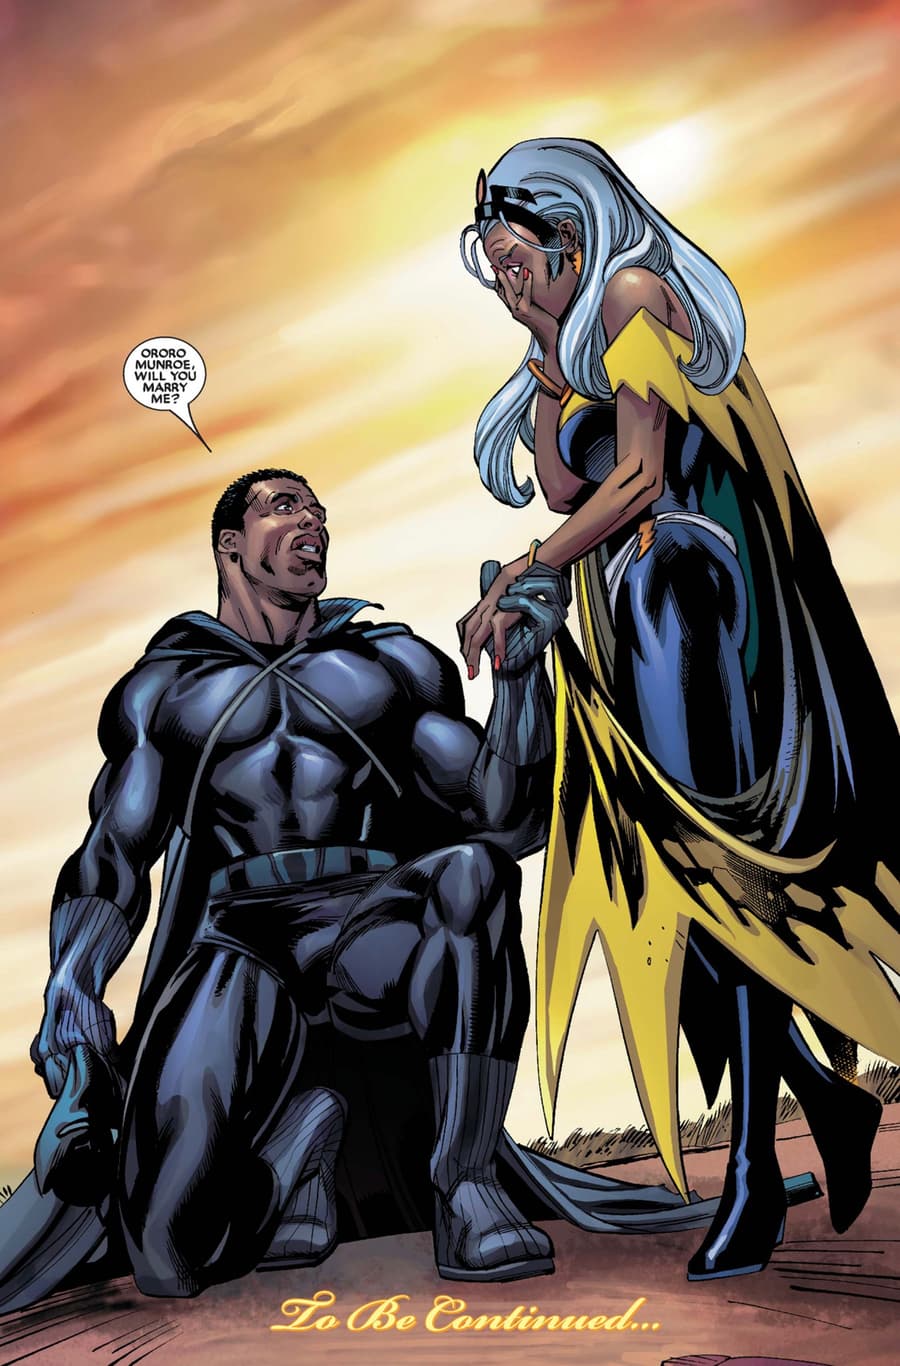 BLACK PANTHER (2005) #14 panel by Reginald Hudlin and Scot George Eaton